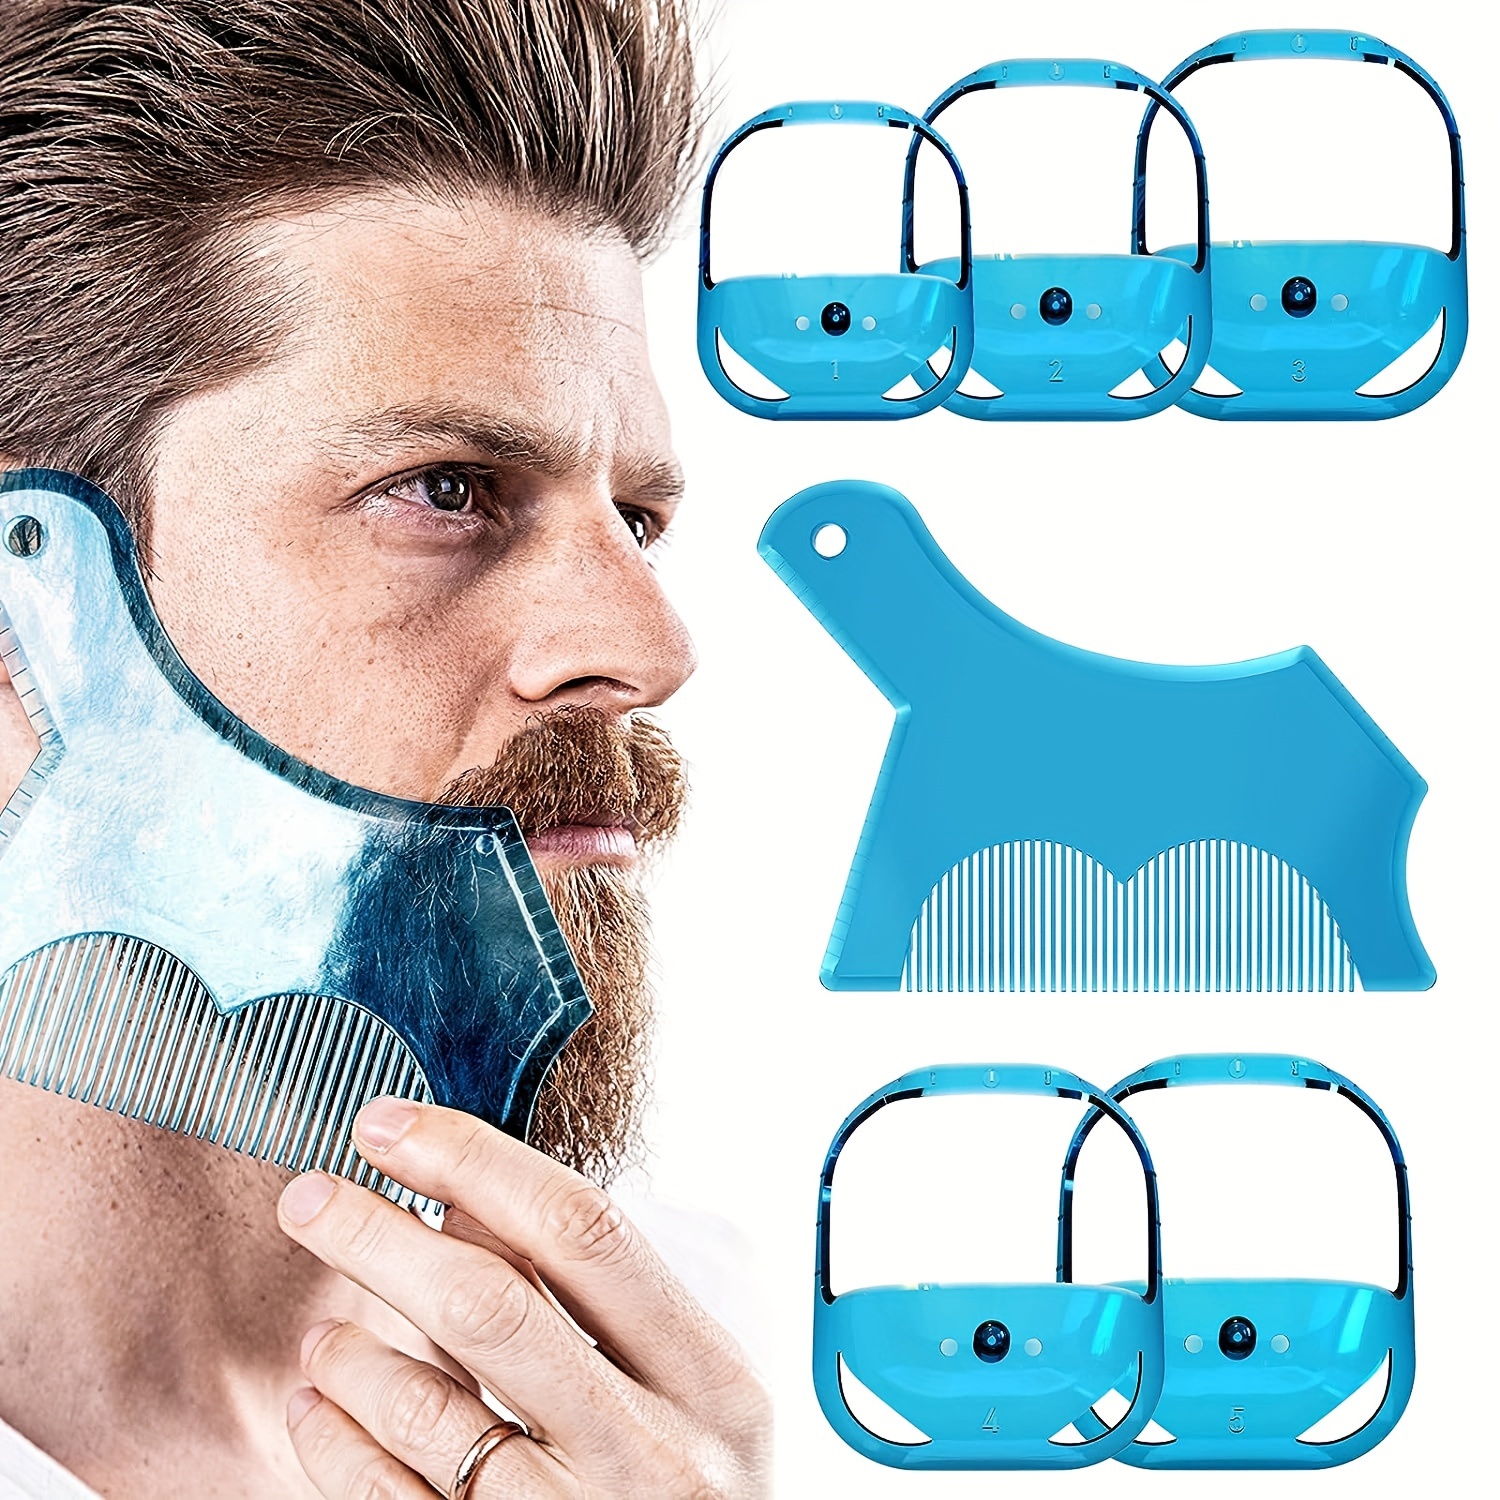  Beard Shaper Kit - Complete Shaping & Styling Tool